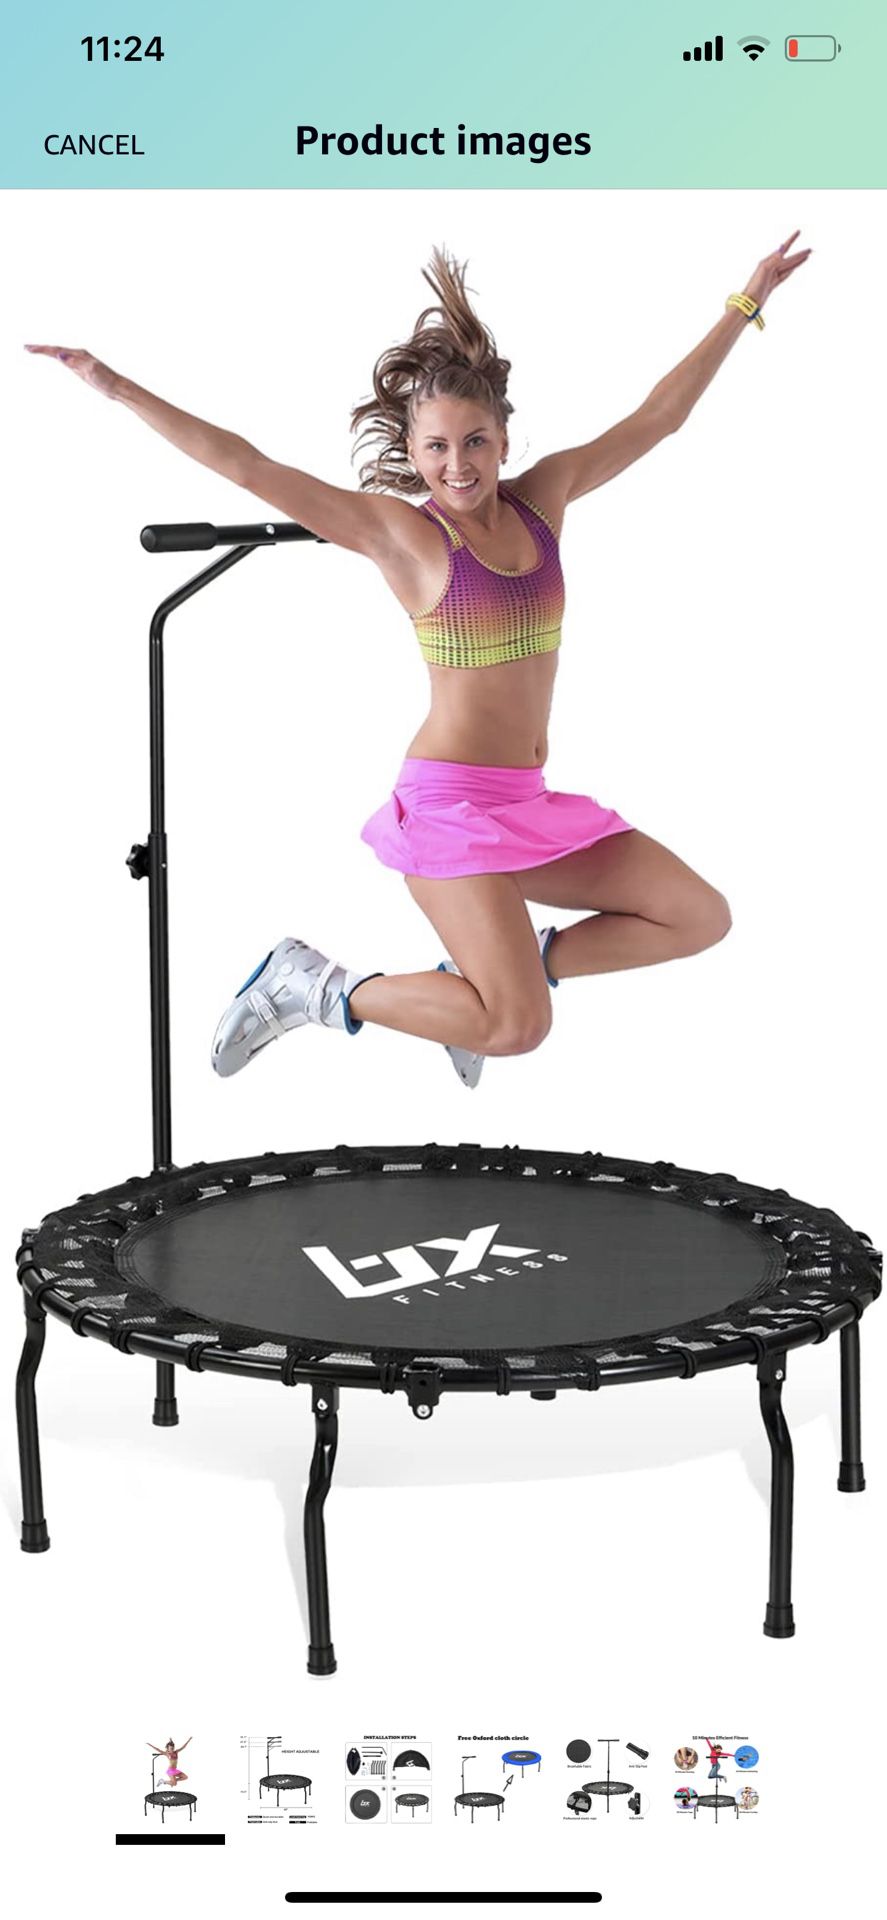 40" Foldable Mini Trampoline,Fitness Rebounder with Adjustable Foam Handle,Exercise Trampoline for Adults Indoor/Outdoor Workout Max Load 330lbs